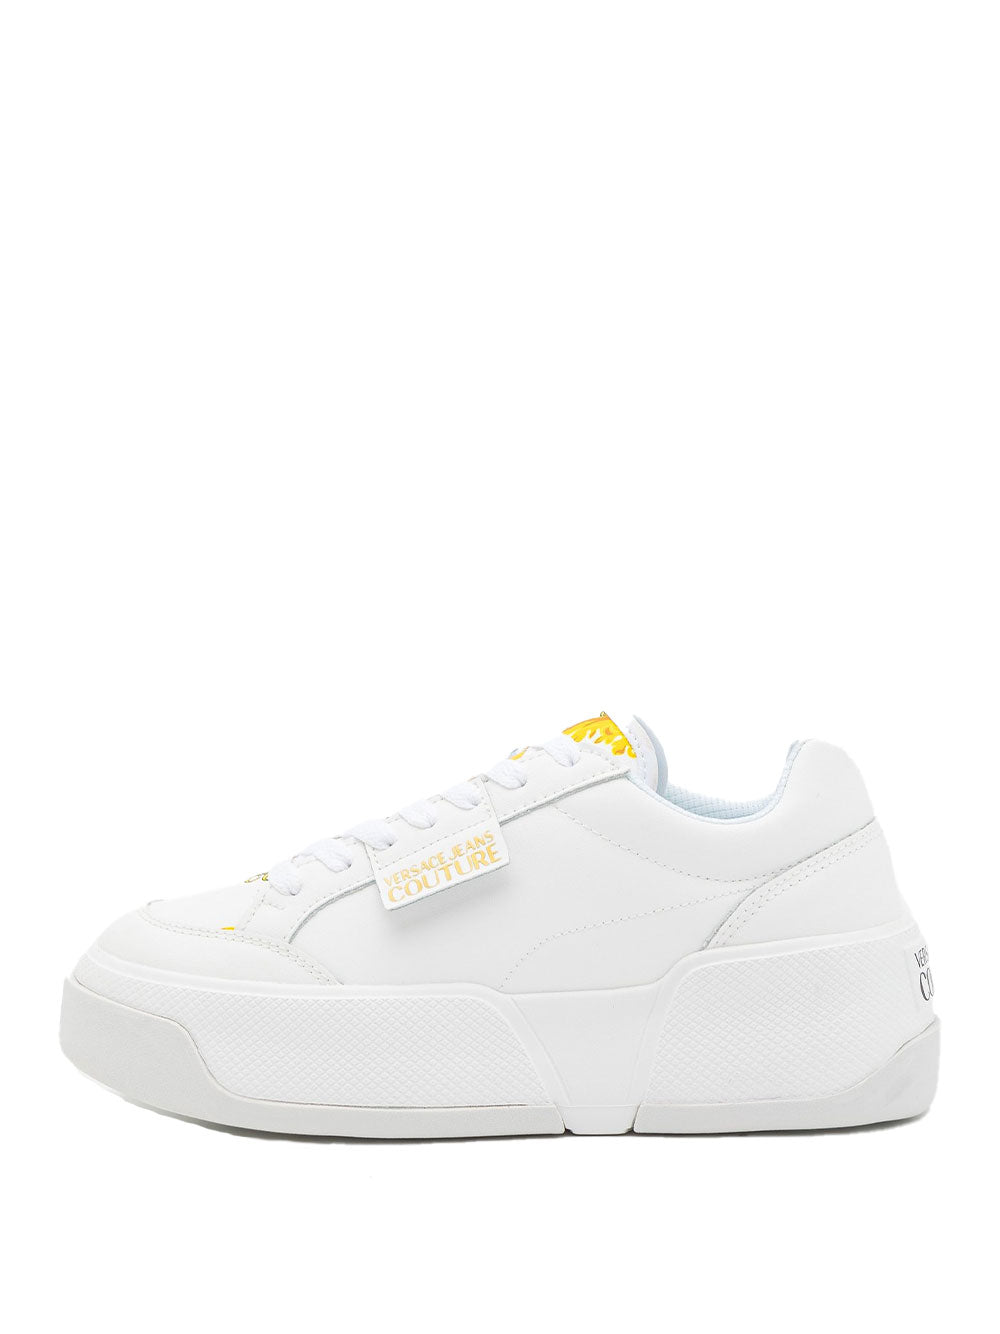 VERSACE COUTURE Sneakers Donna - Bianco